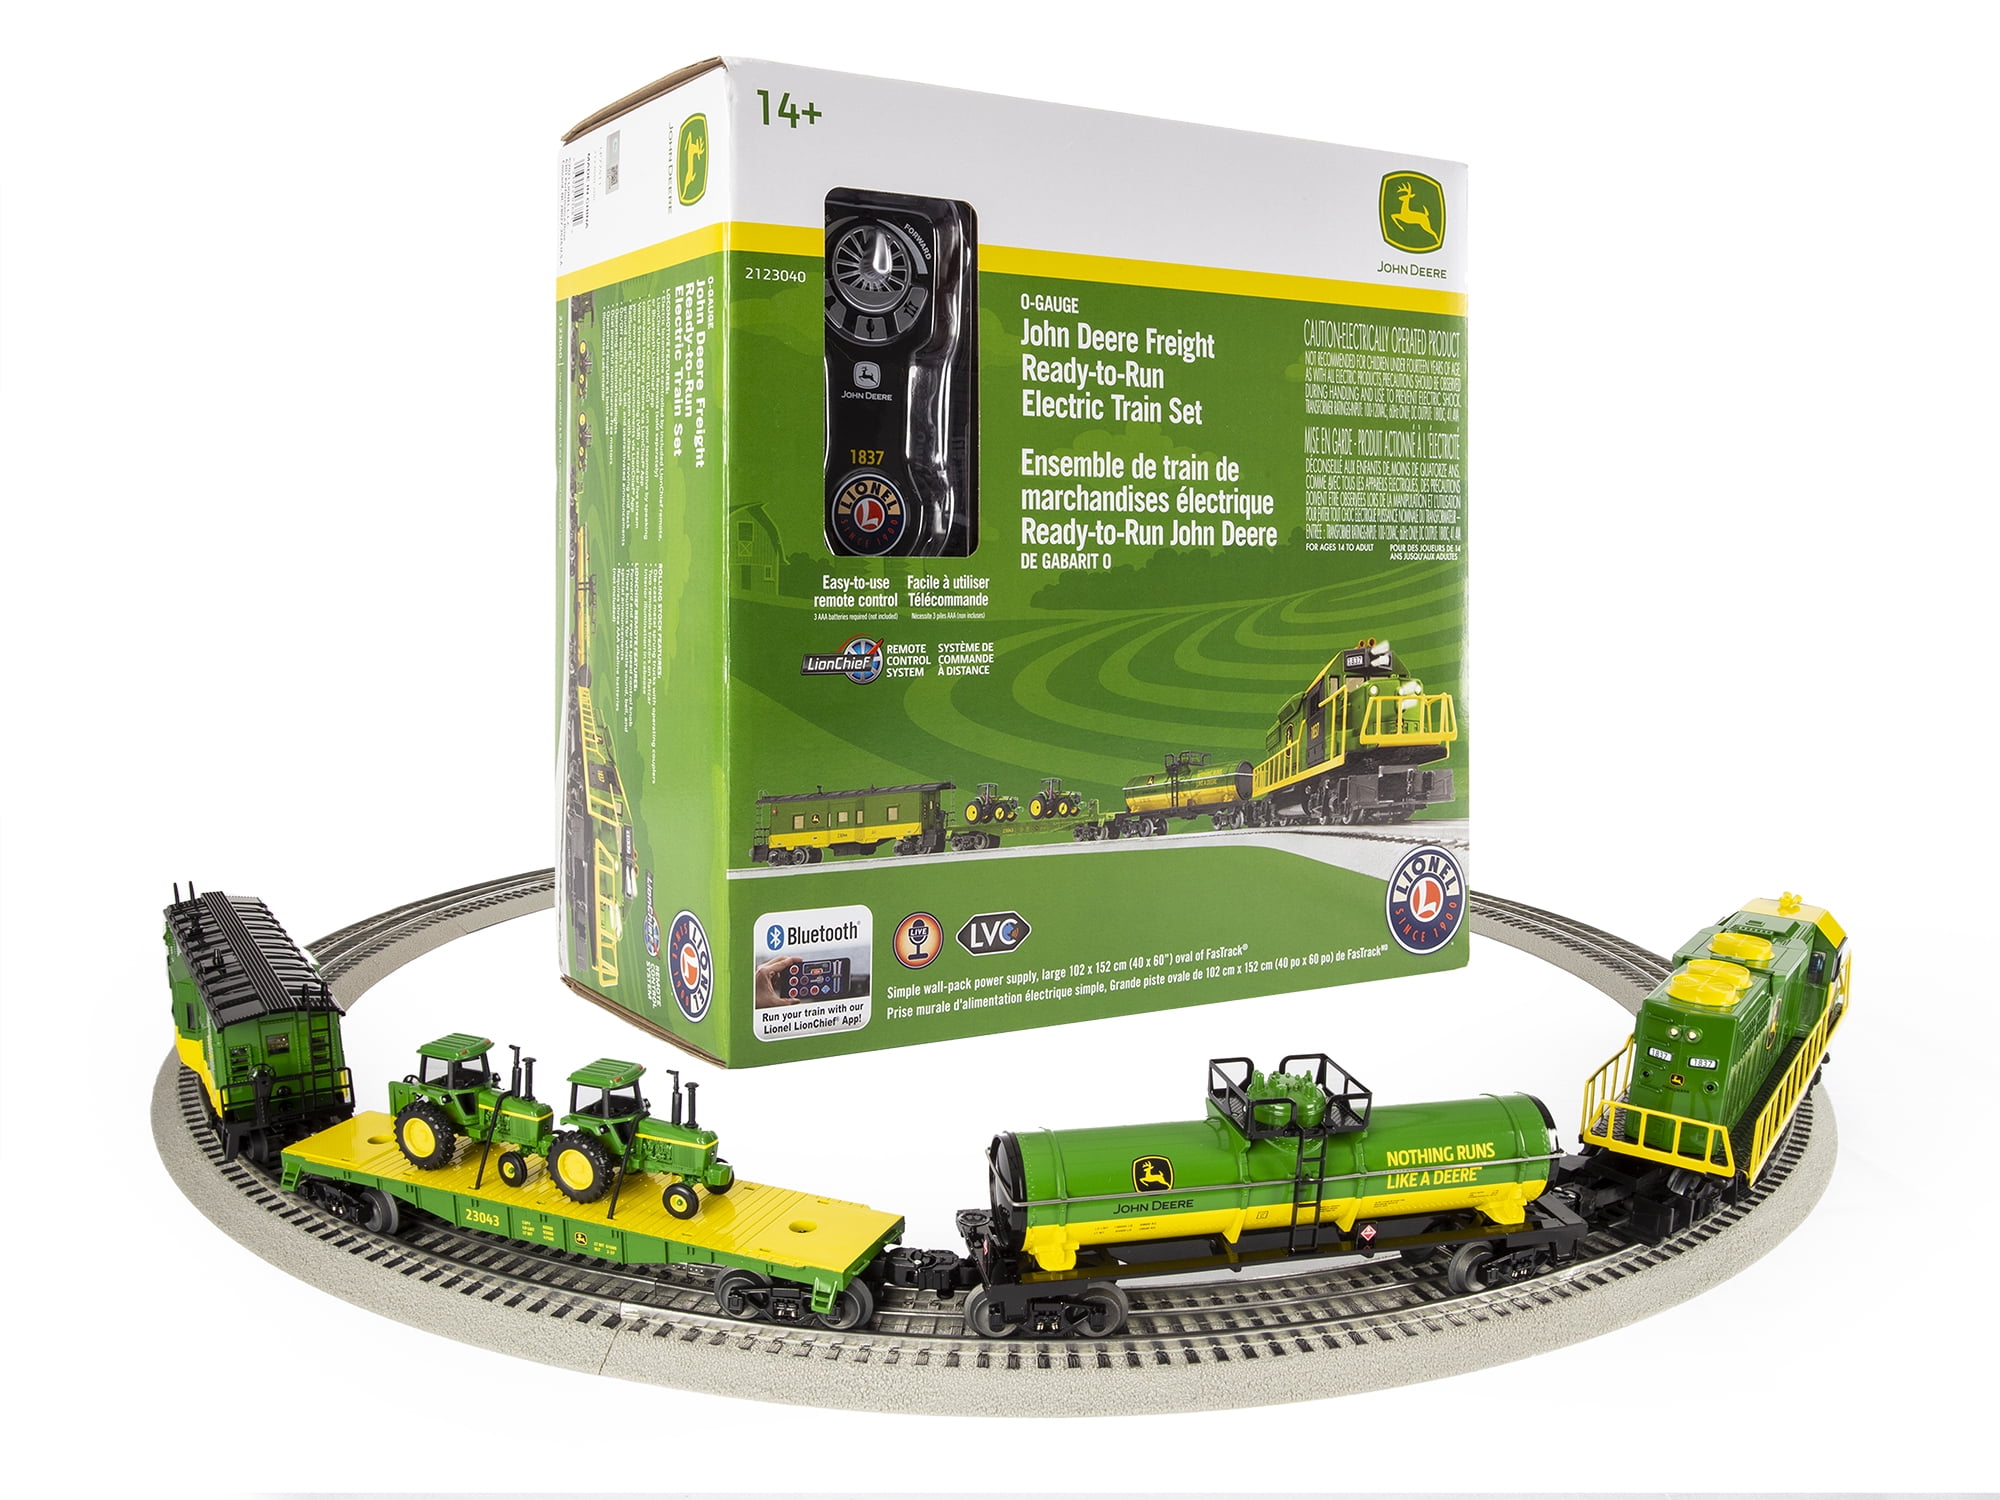 Lionel John Deere Freight Electric O Gauge Train Set with and Bluetooth 5.0 Capability - Walmart.com